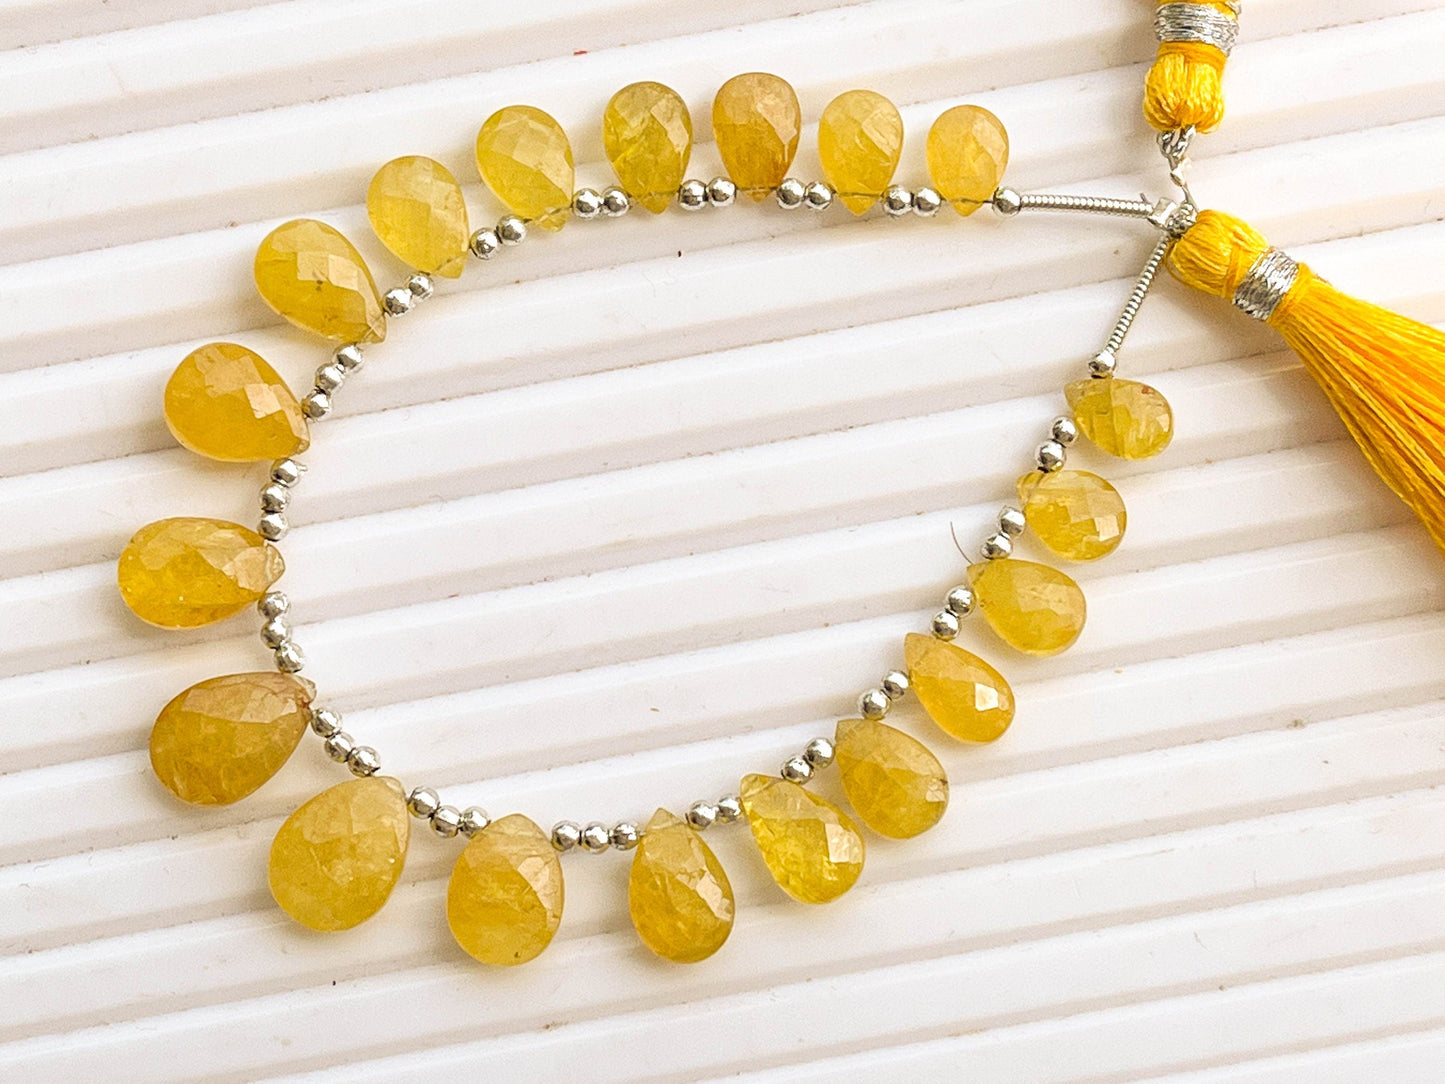 19 Pieces Untreated Natural Yellow Sapphire Pear Shape Faceted Briolette Beads Beadsforyourjewelry